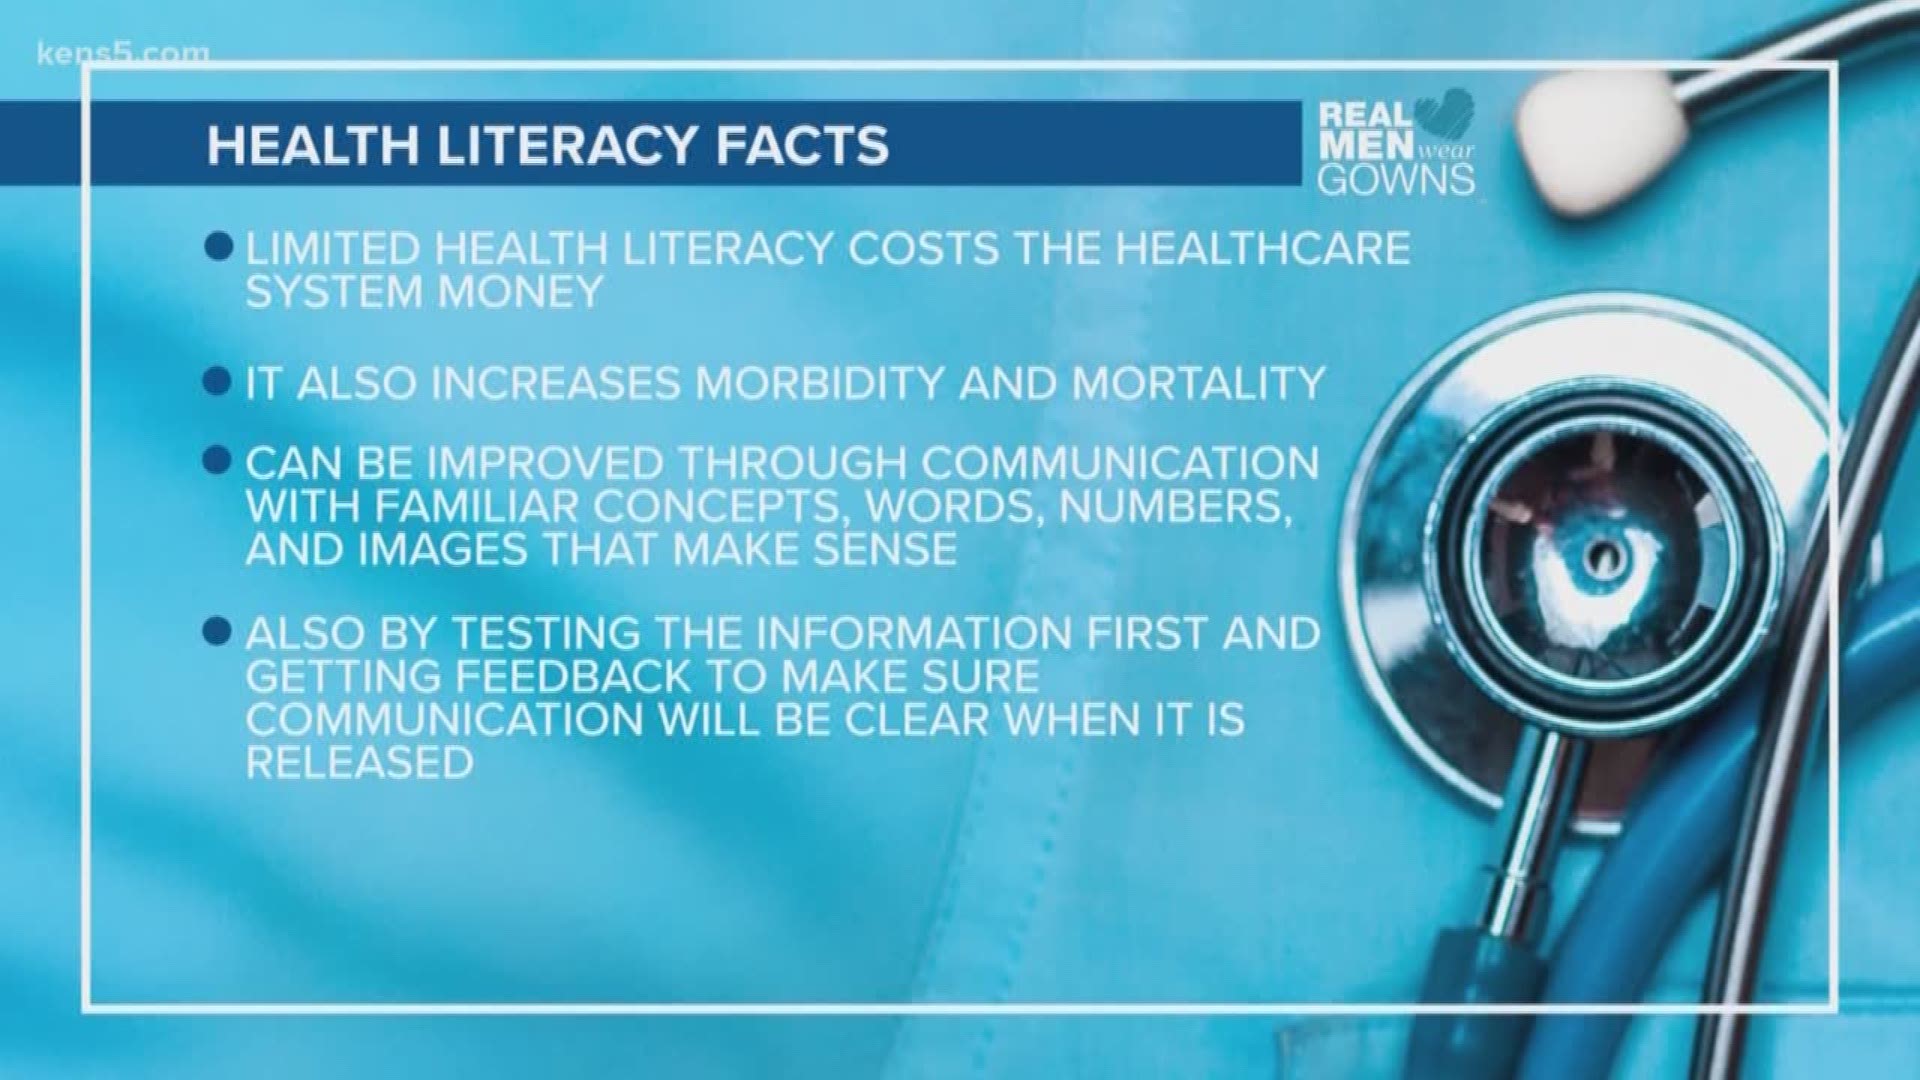 Patients can often misunderstand what doctors tell them, which is why improving health literacy is so important.